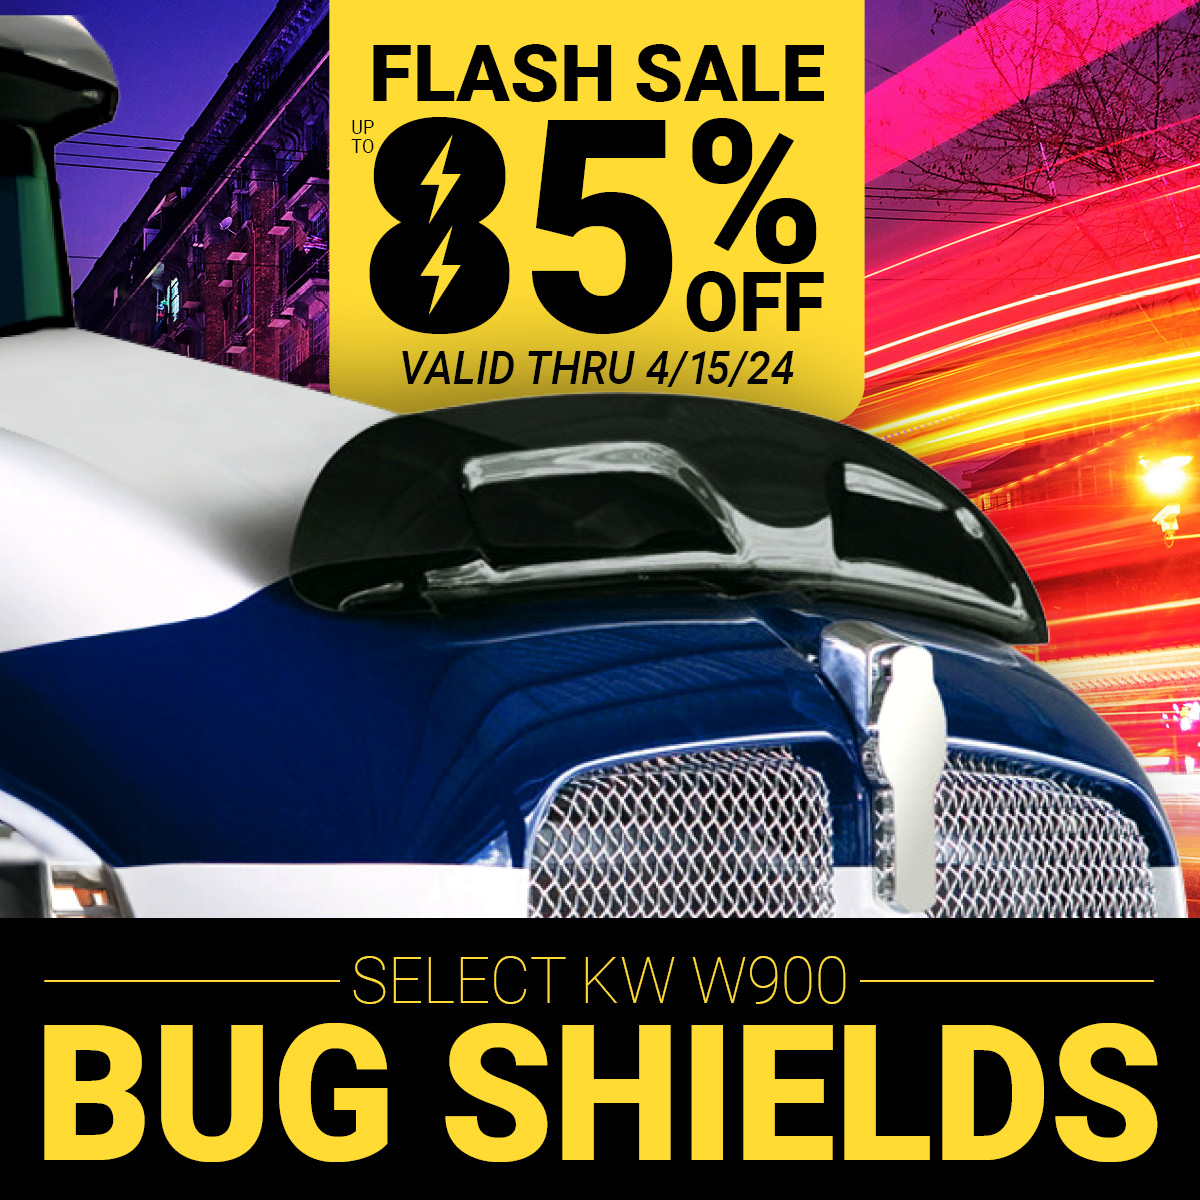 A⚡Flash Sale⚡you won't want to miss, what a deal! Get up to 85% OFF on select Kenworth W900 EGR Bug Shields:  4statetrucks.com/search/?search… Ends 4/15 11:59 p.m. cst.  #4StateTrucks #ChromeShopMafia #chromeshop #customtrucks #trucking #bigrig #truckers #diesel #bugshield